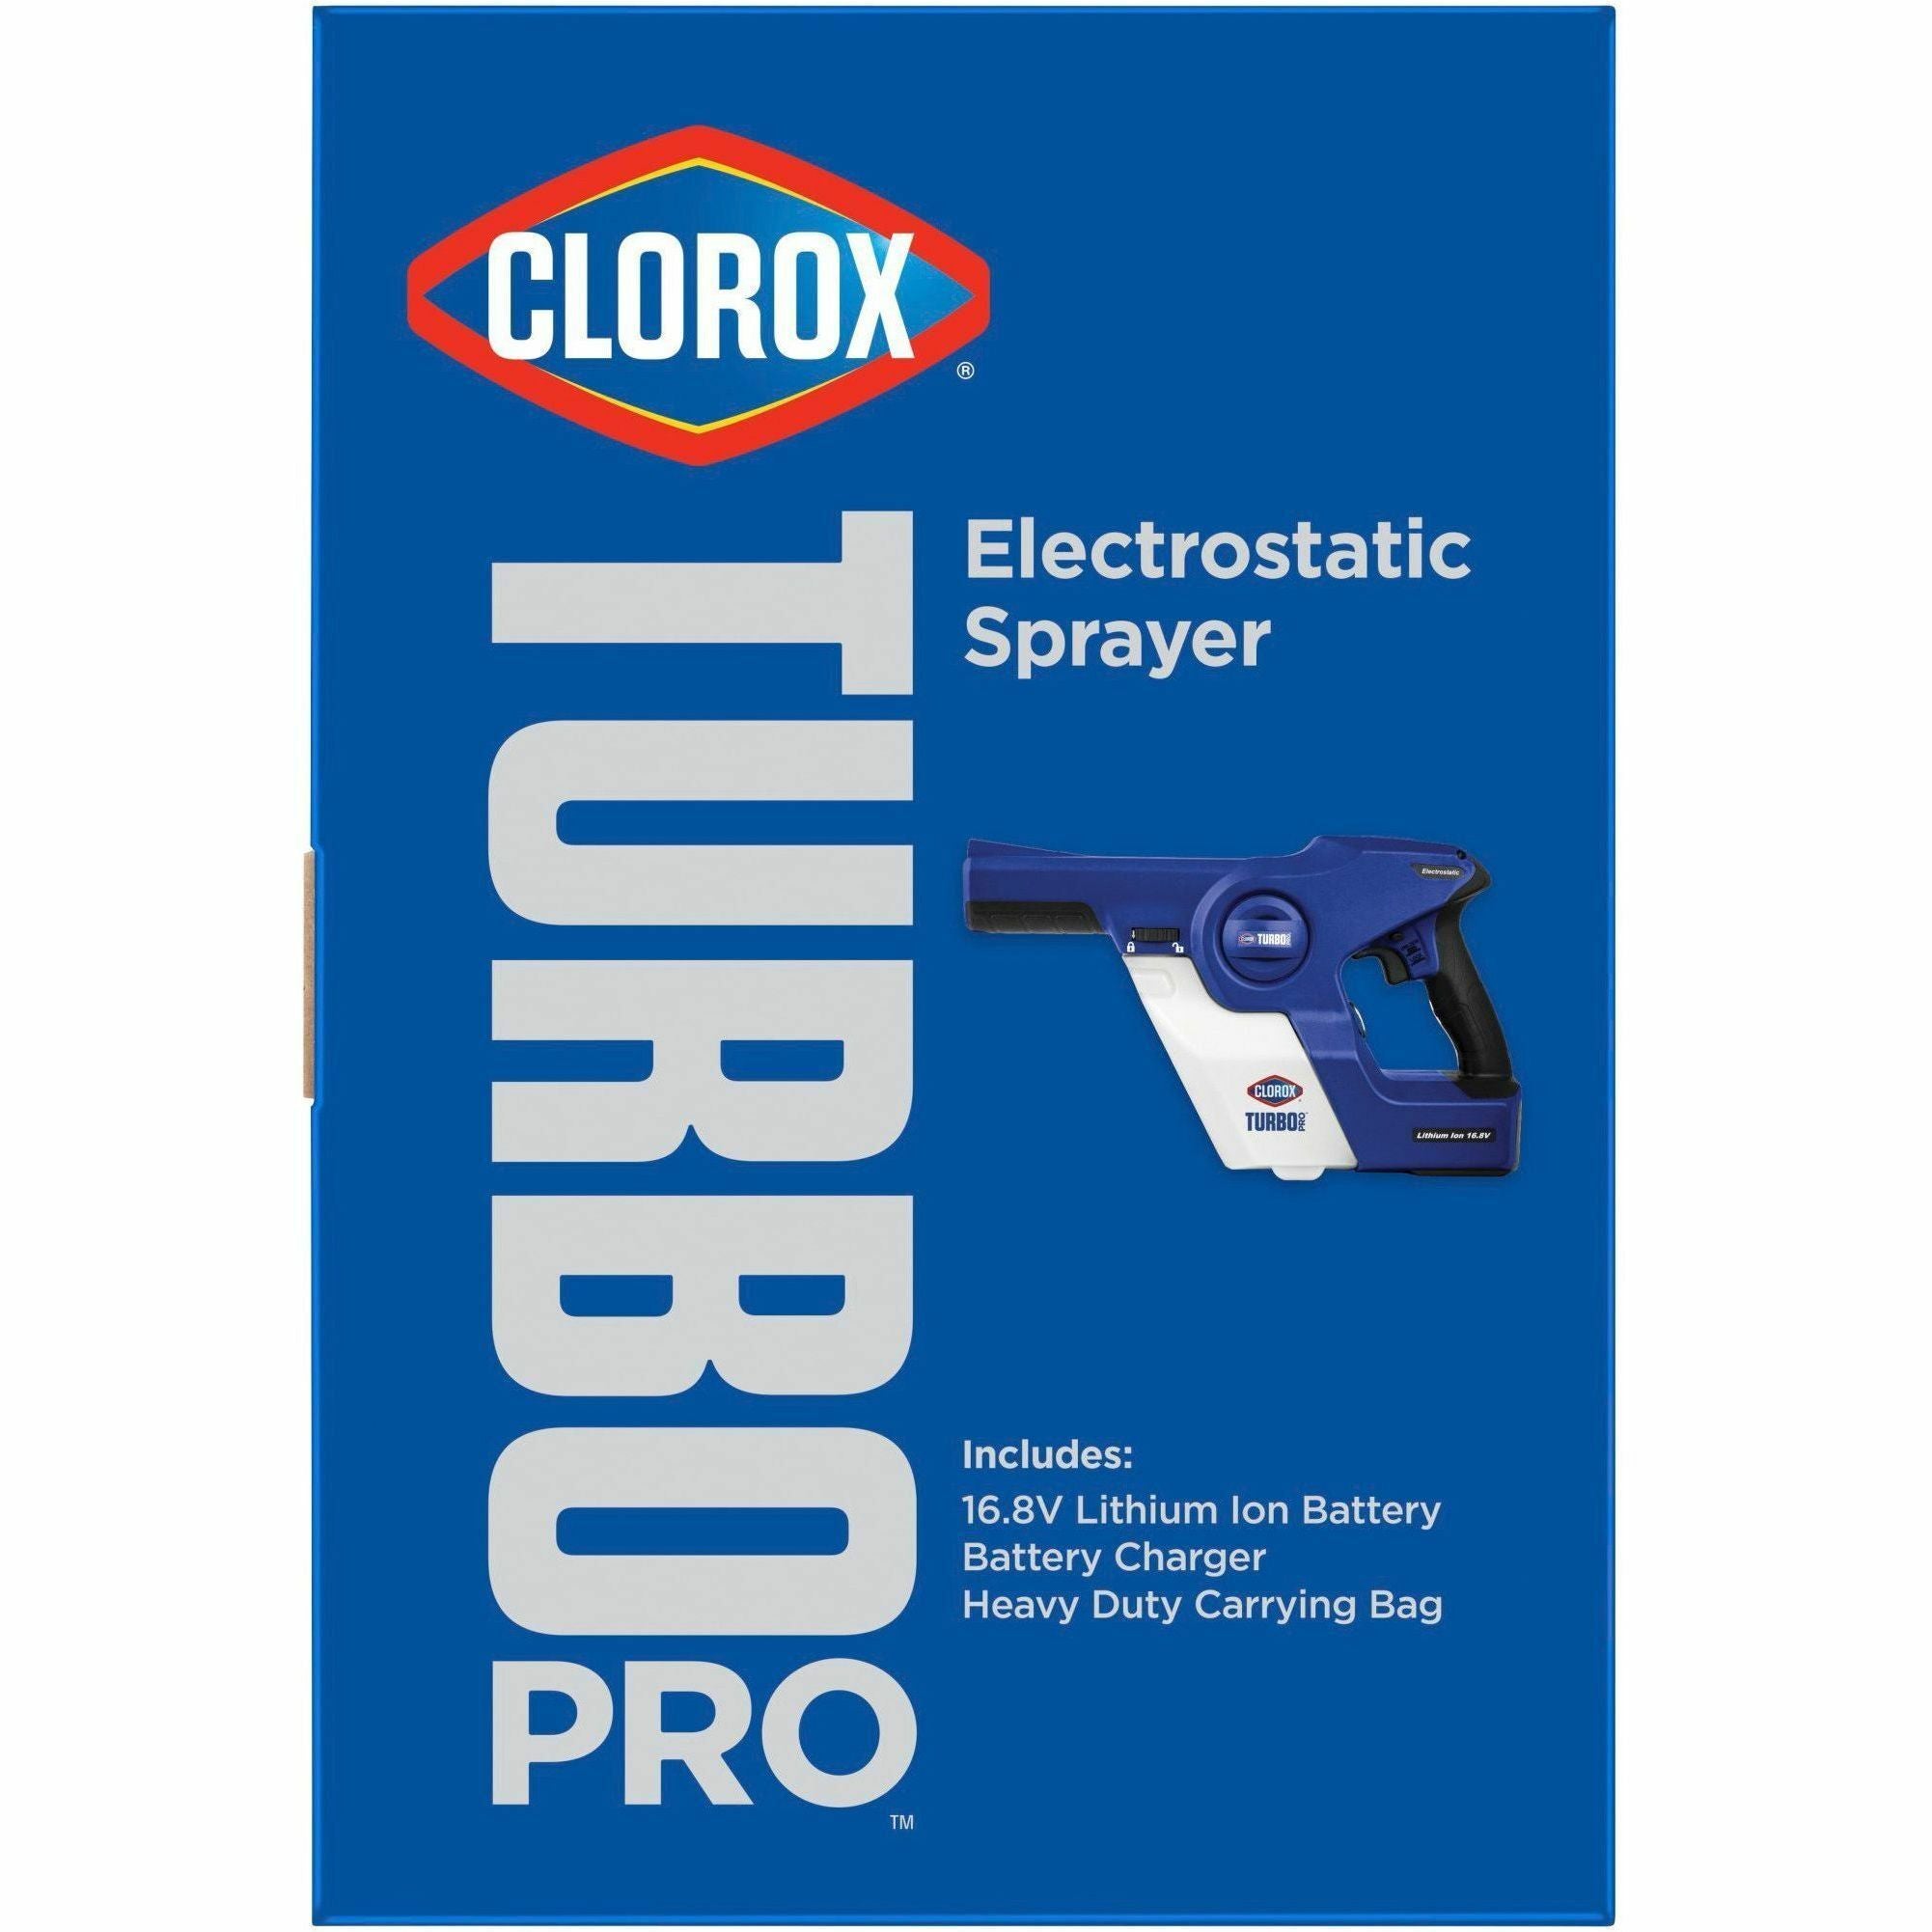 clorox-turbopro-electrostatic-sprayer-suitable-for-disinfecting-airport-hotel-laundry-room-daycare-office-gym-locker-room-electrostatic-handheld-disinfectant-lightweight-1-each-blue_clo29561 - 4